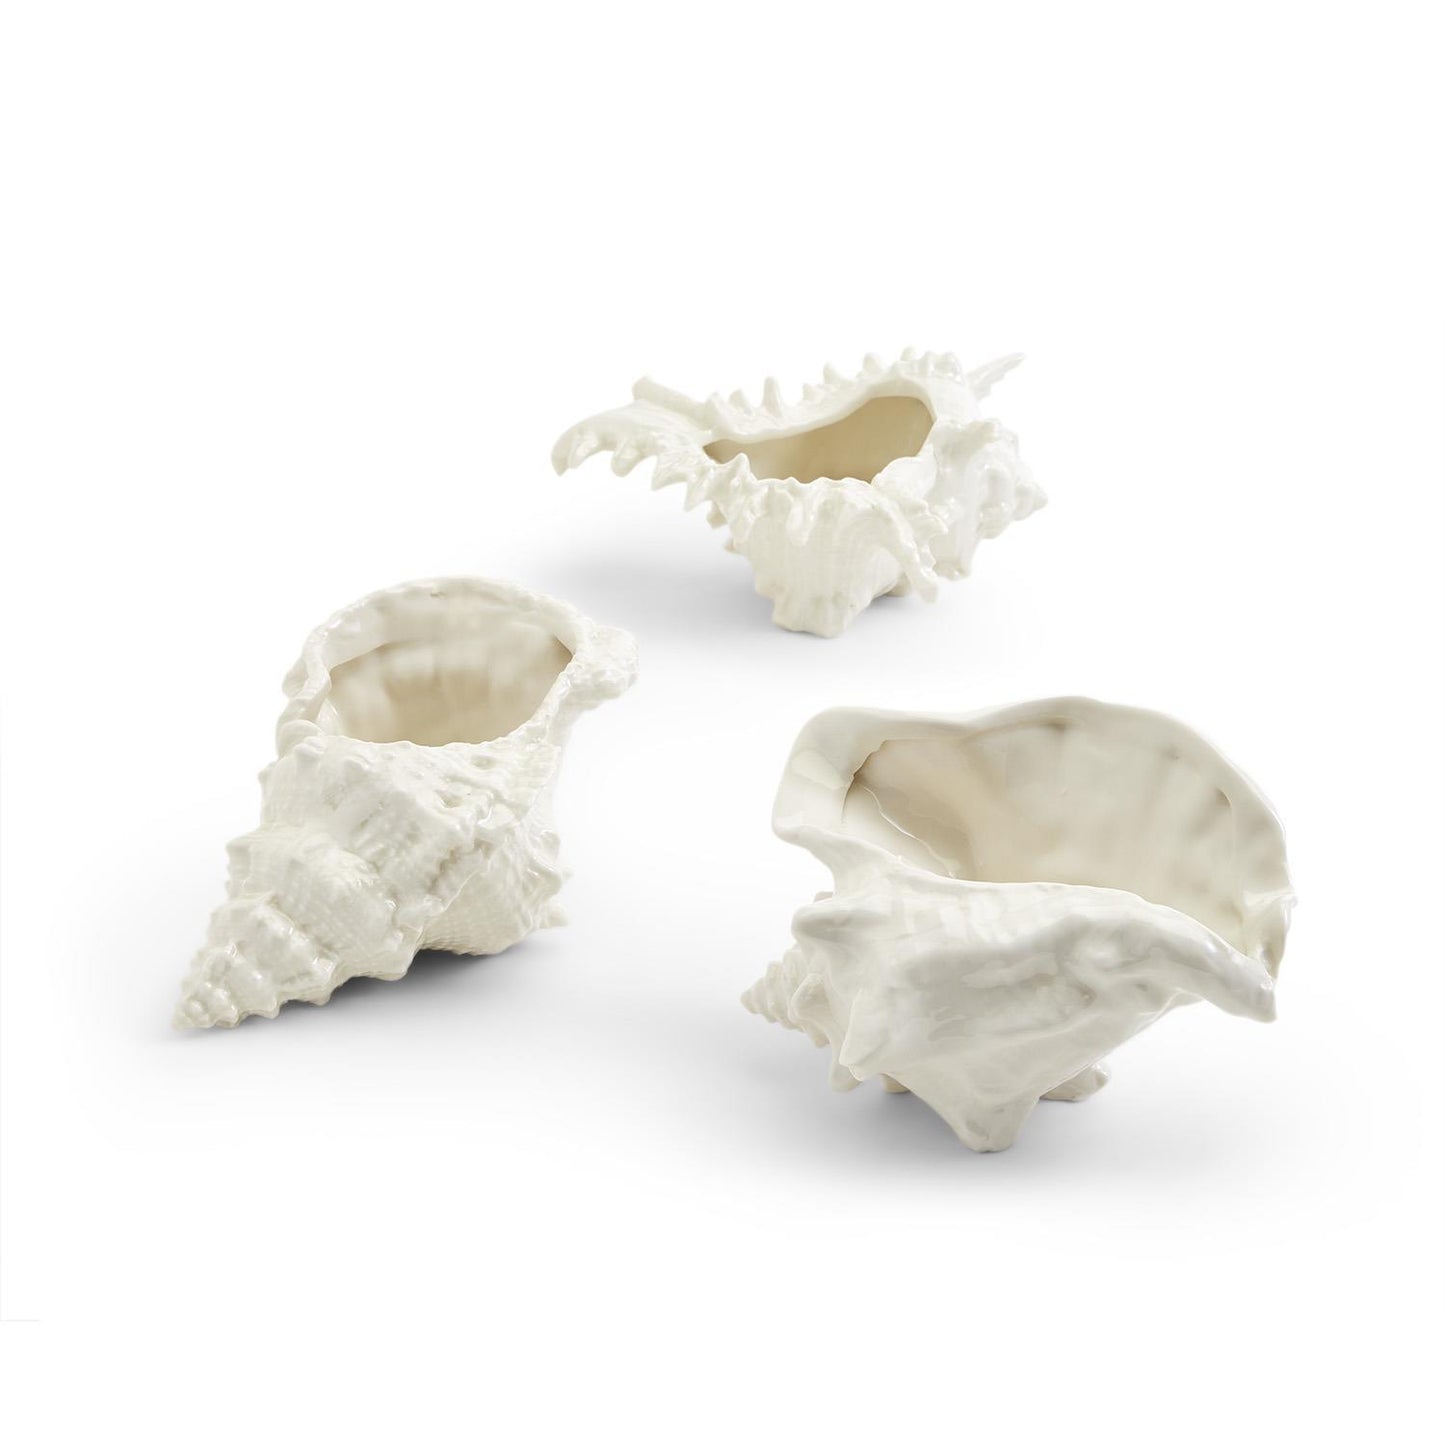 Two's Company Seashell Decor Cachepot, Set of 3, Assorted 3 Designs